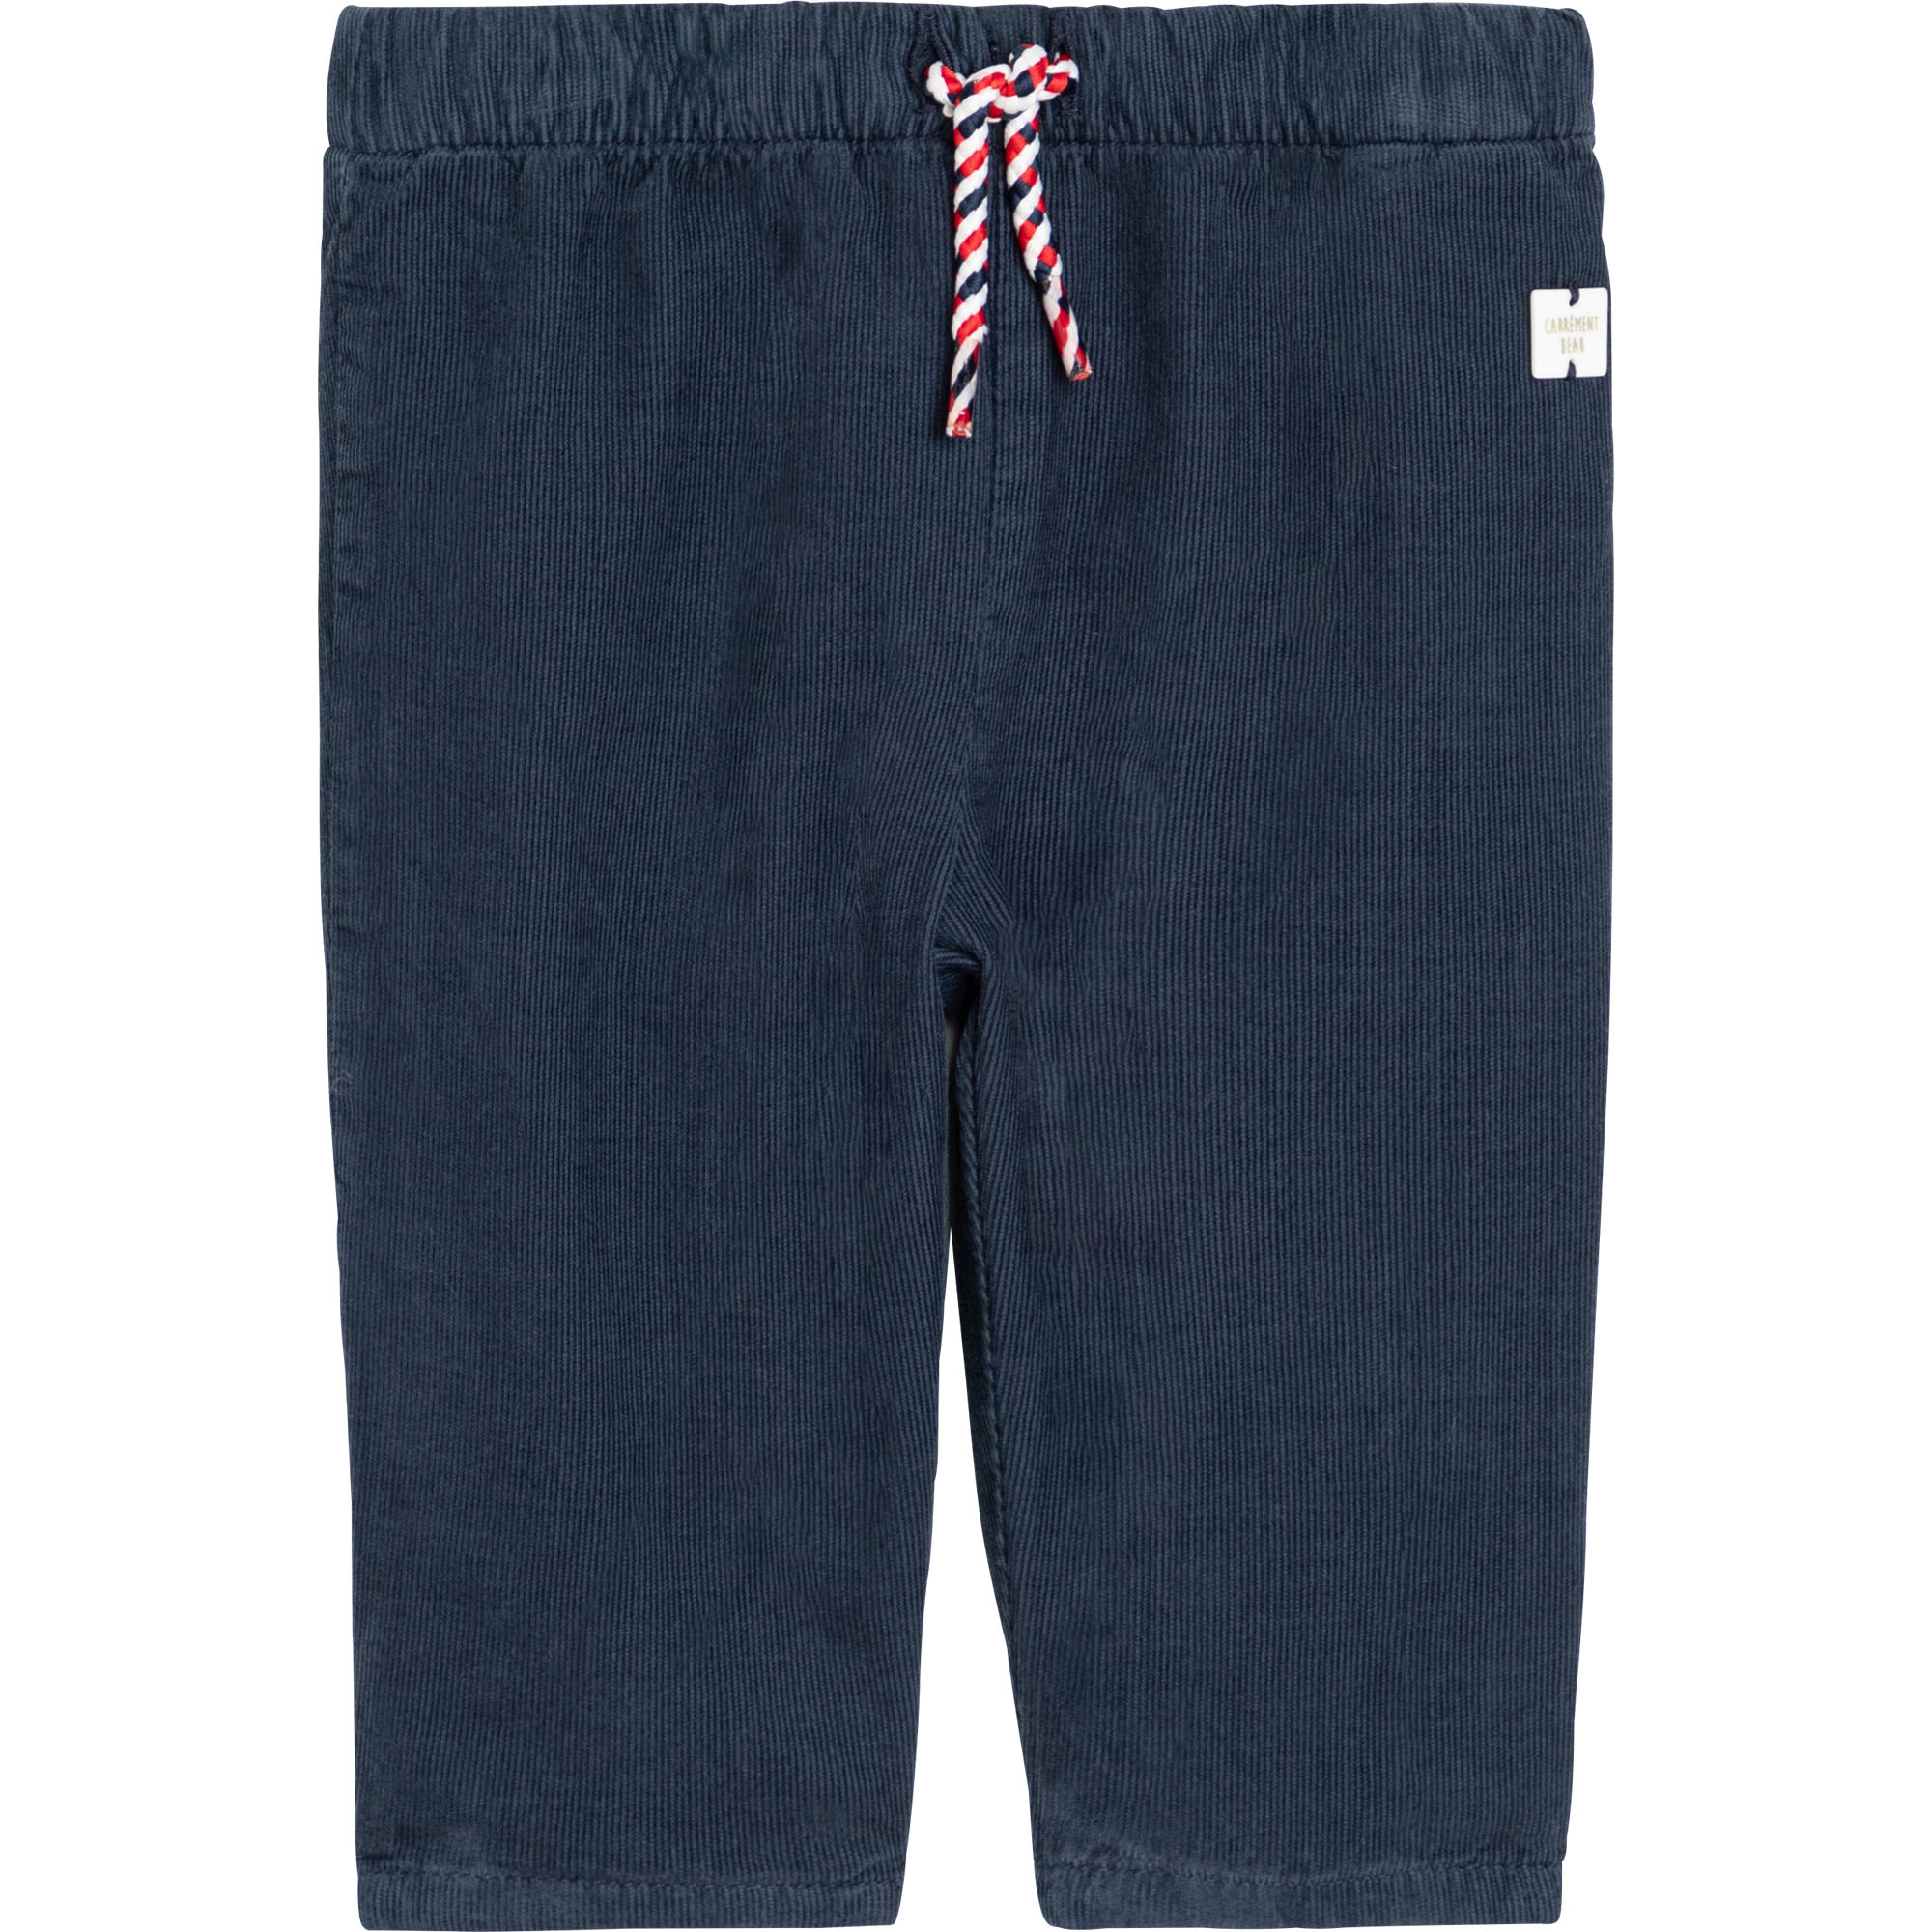 Corduroy pants with cord CARREMENT BEAU for BOY